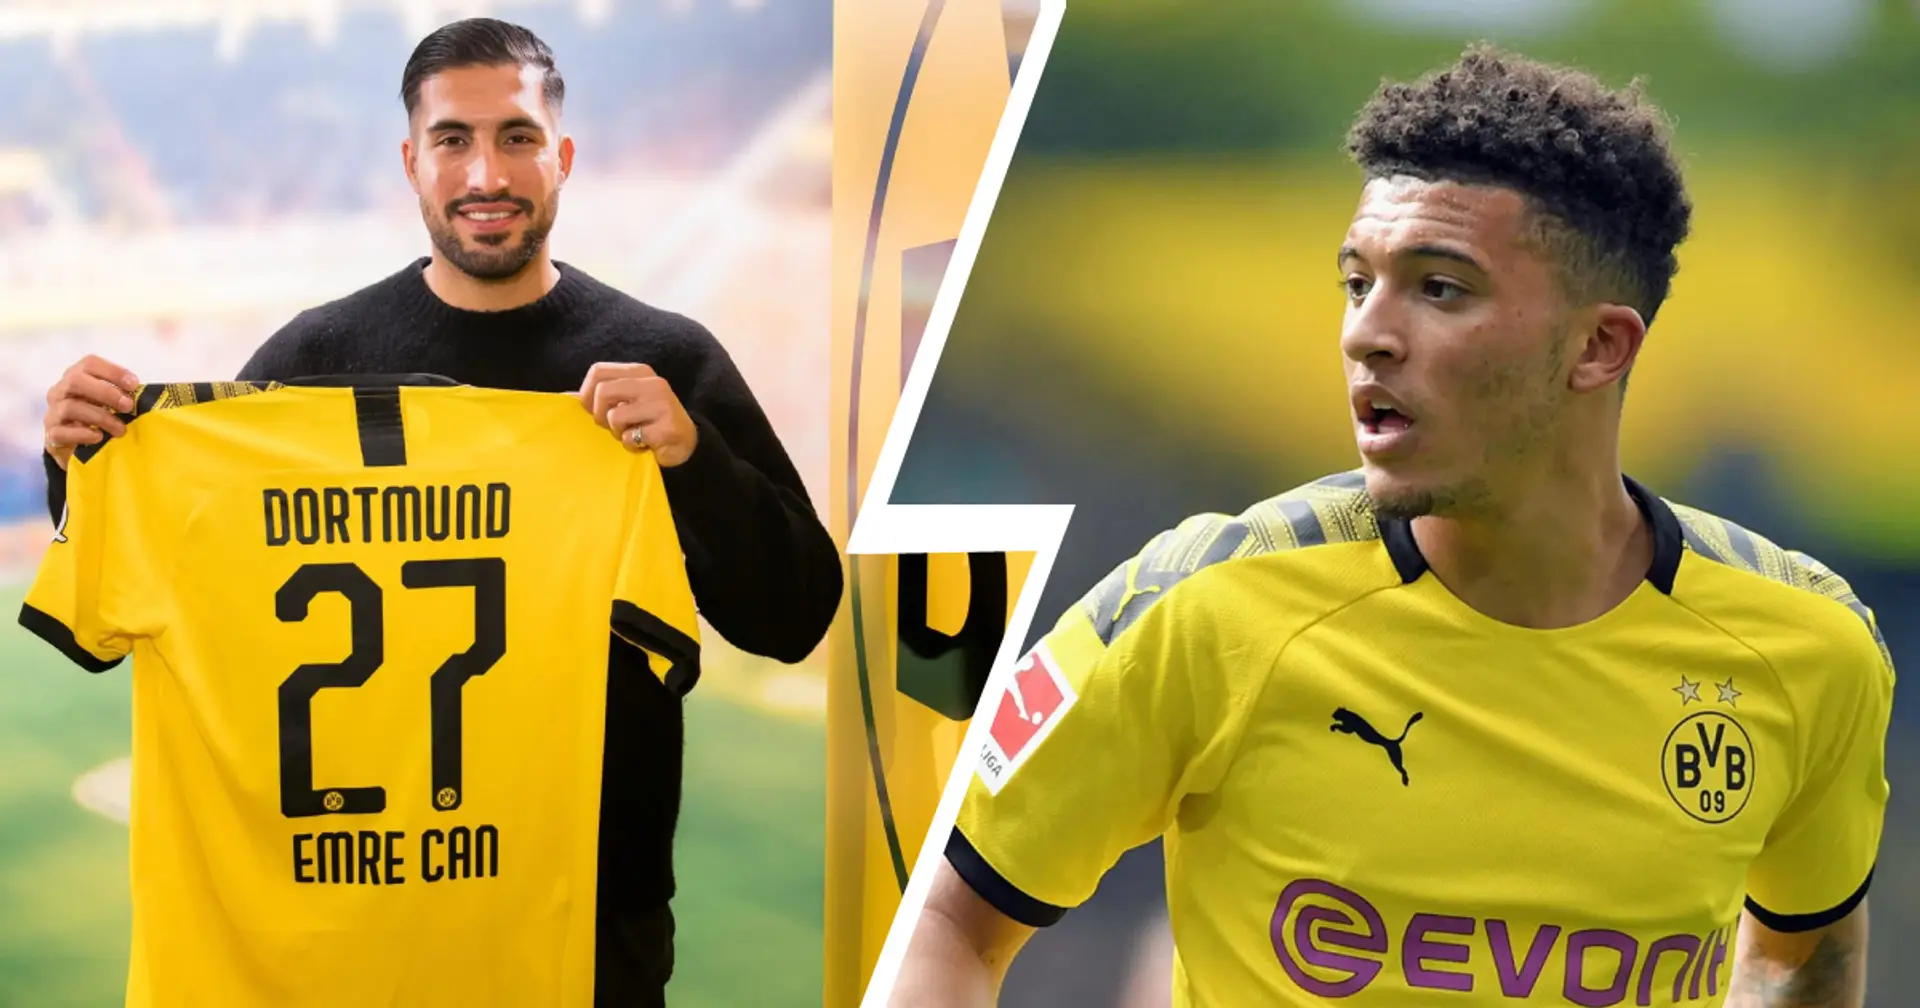 Former Liverpool man Emre Can on Jadon Sancho's future: 'I see no reason to put United over Dortmund. Neither sporty nor attractive'